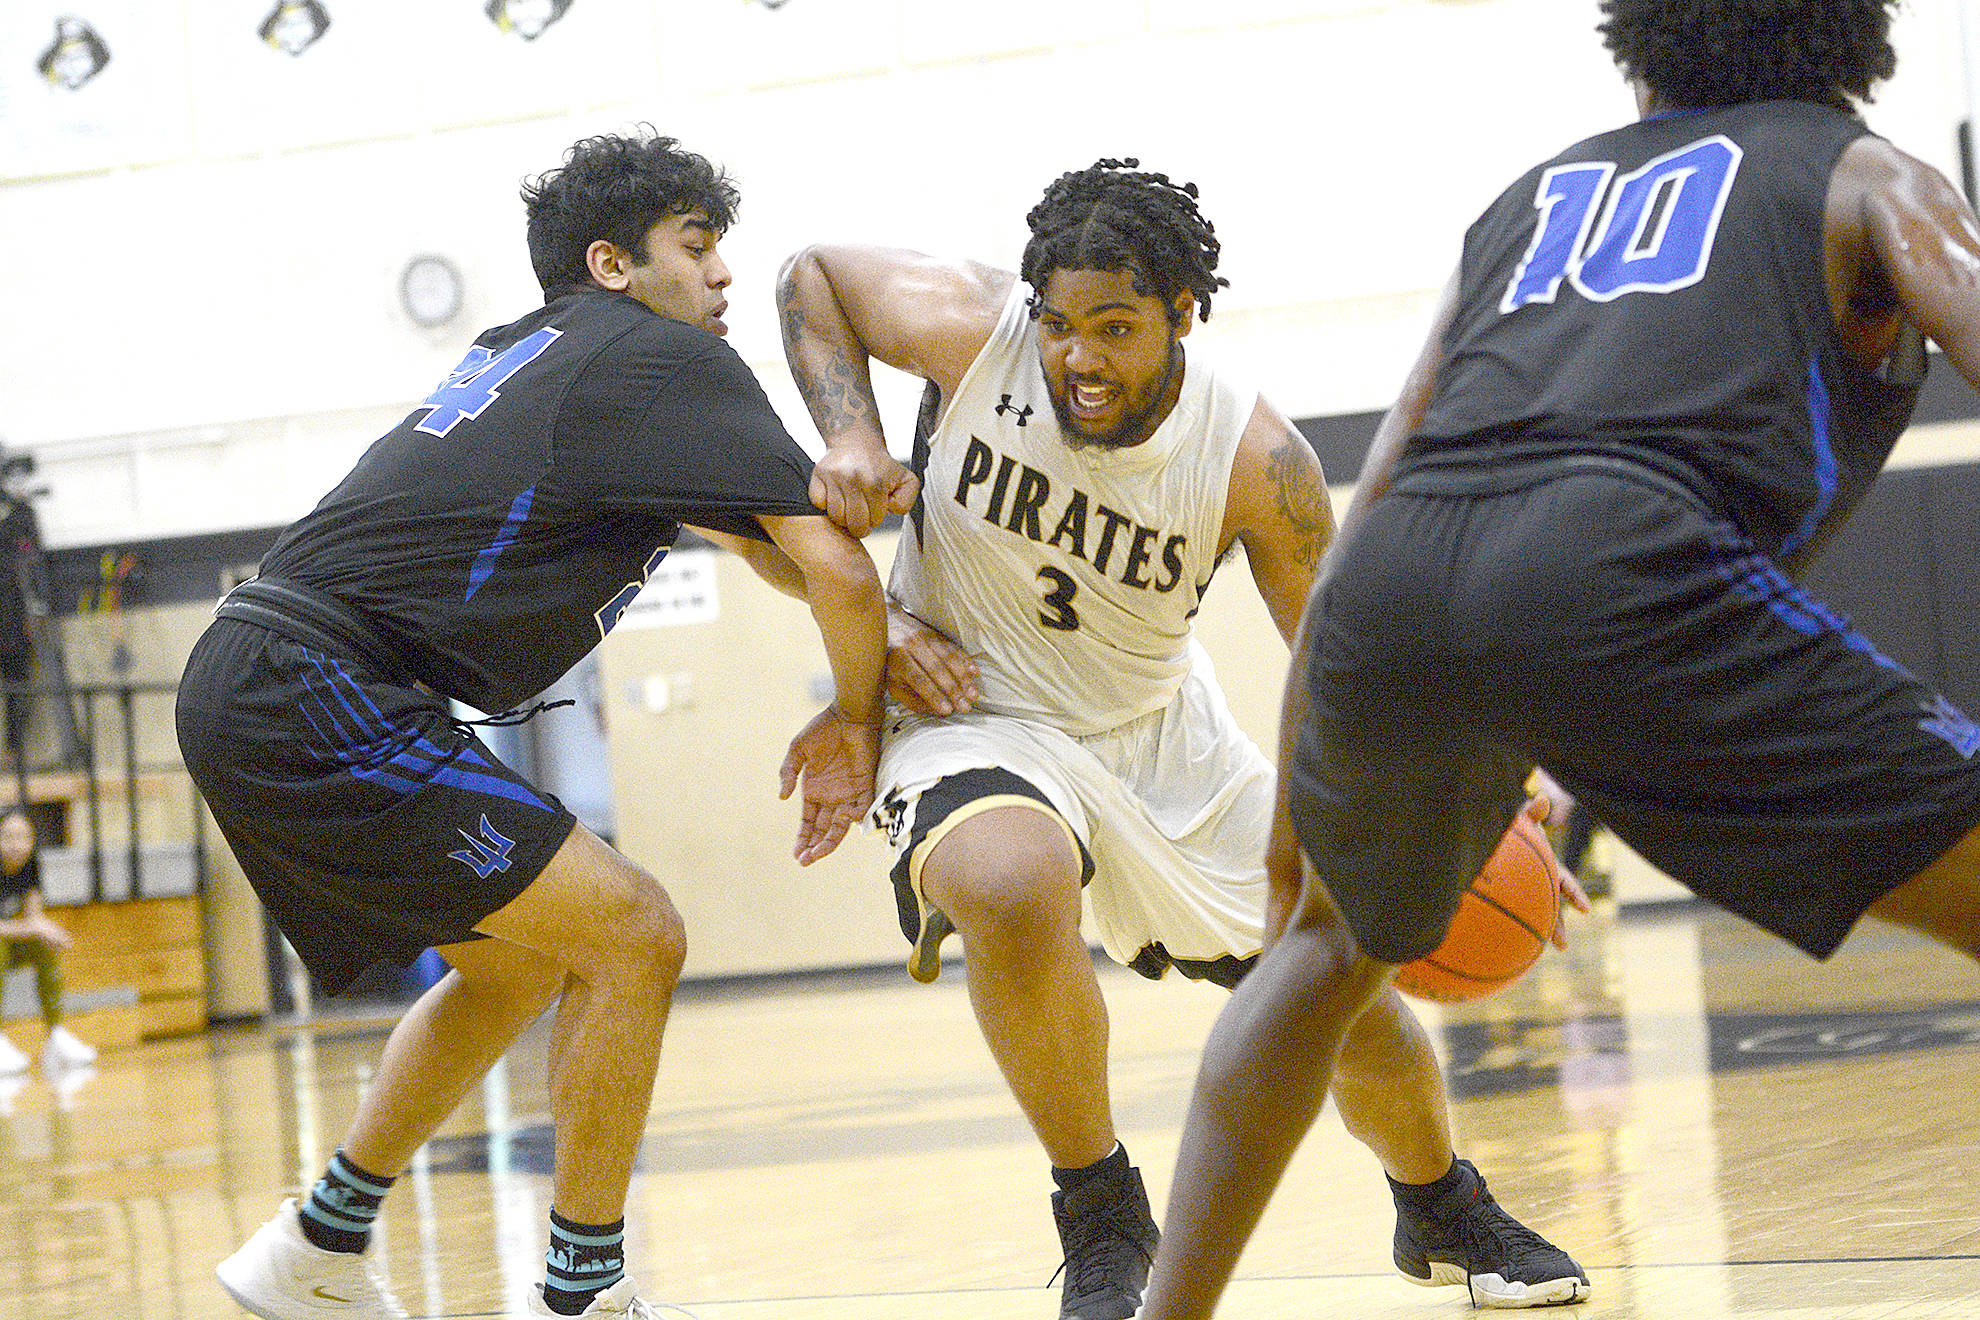 Peninsula College’s Davien Harris-Williams drives against Edmonds on Saturday night. Harris-Williams scored 34 points to help lead the Pirates to a 111-98 win over the Tritons to qualify for the NWAC Tournament. (Jesse Major/for Peninsula Daily News)                                <strong>Jesse Major</strong>/for Peninsula Daily News                                Peninsula College’s Davien Harris-Williams drives against Edmonds on Saturday night. Harris-Williams scored 34 points to help lead the Pirates to a 111-98 win over the Tritons to qualify for the NWAC Tournament.